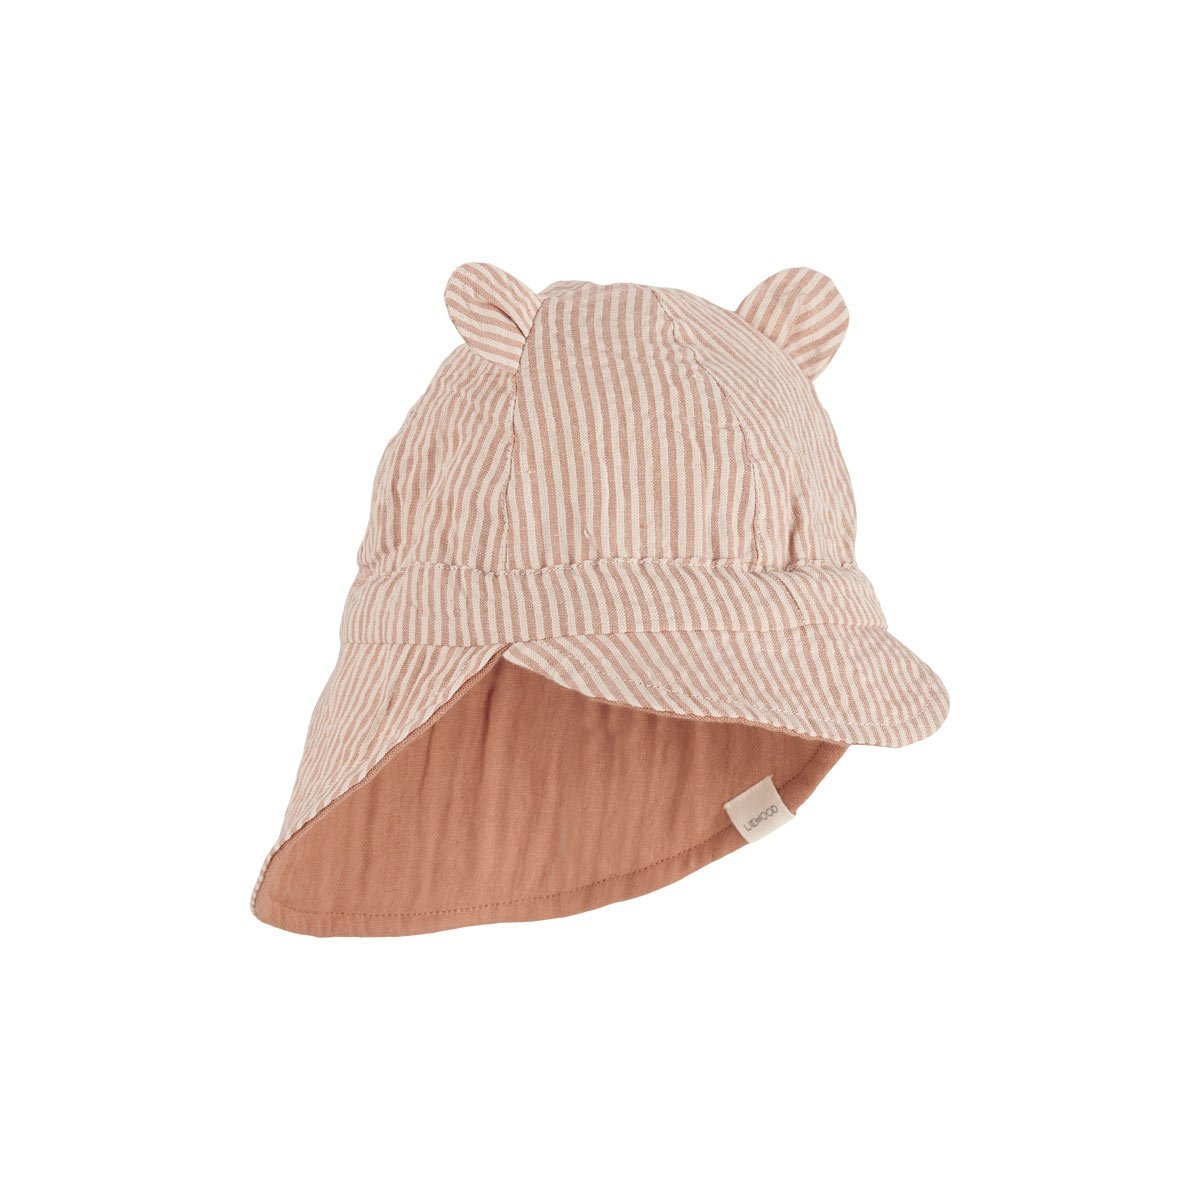 Liewood Cosmo Sun Hat in Tuscany Rose - Scandibørn